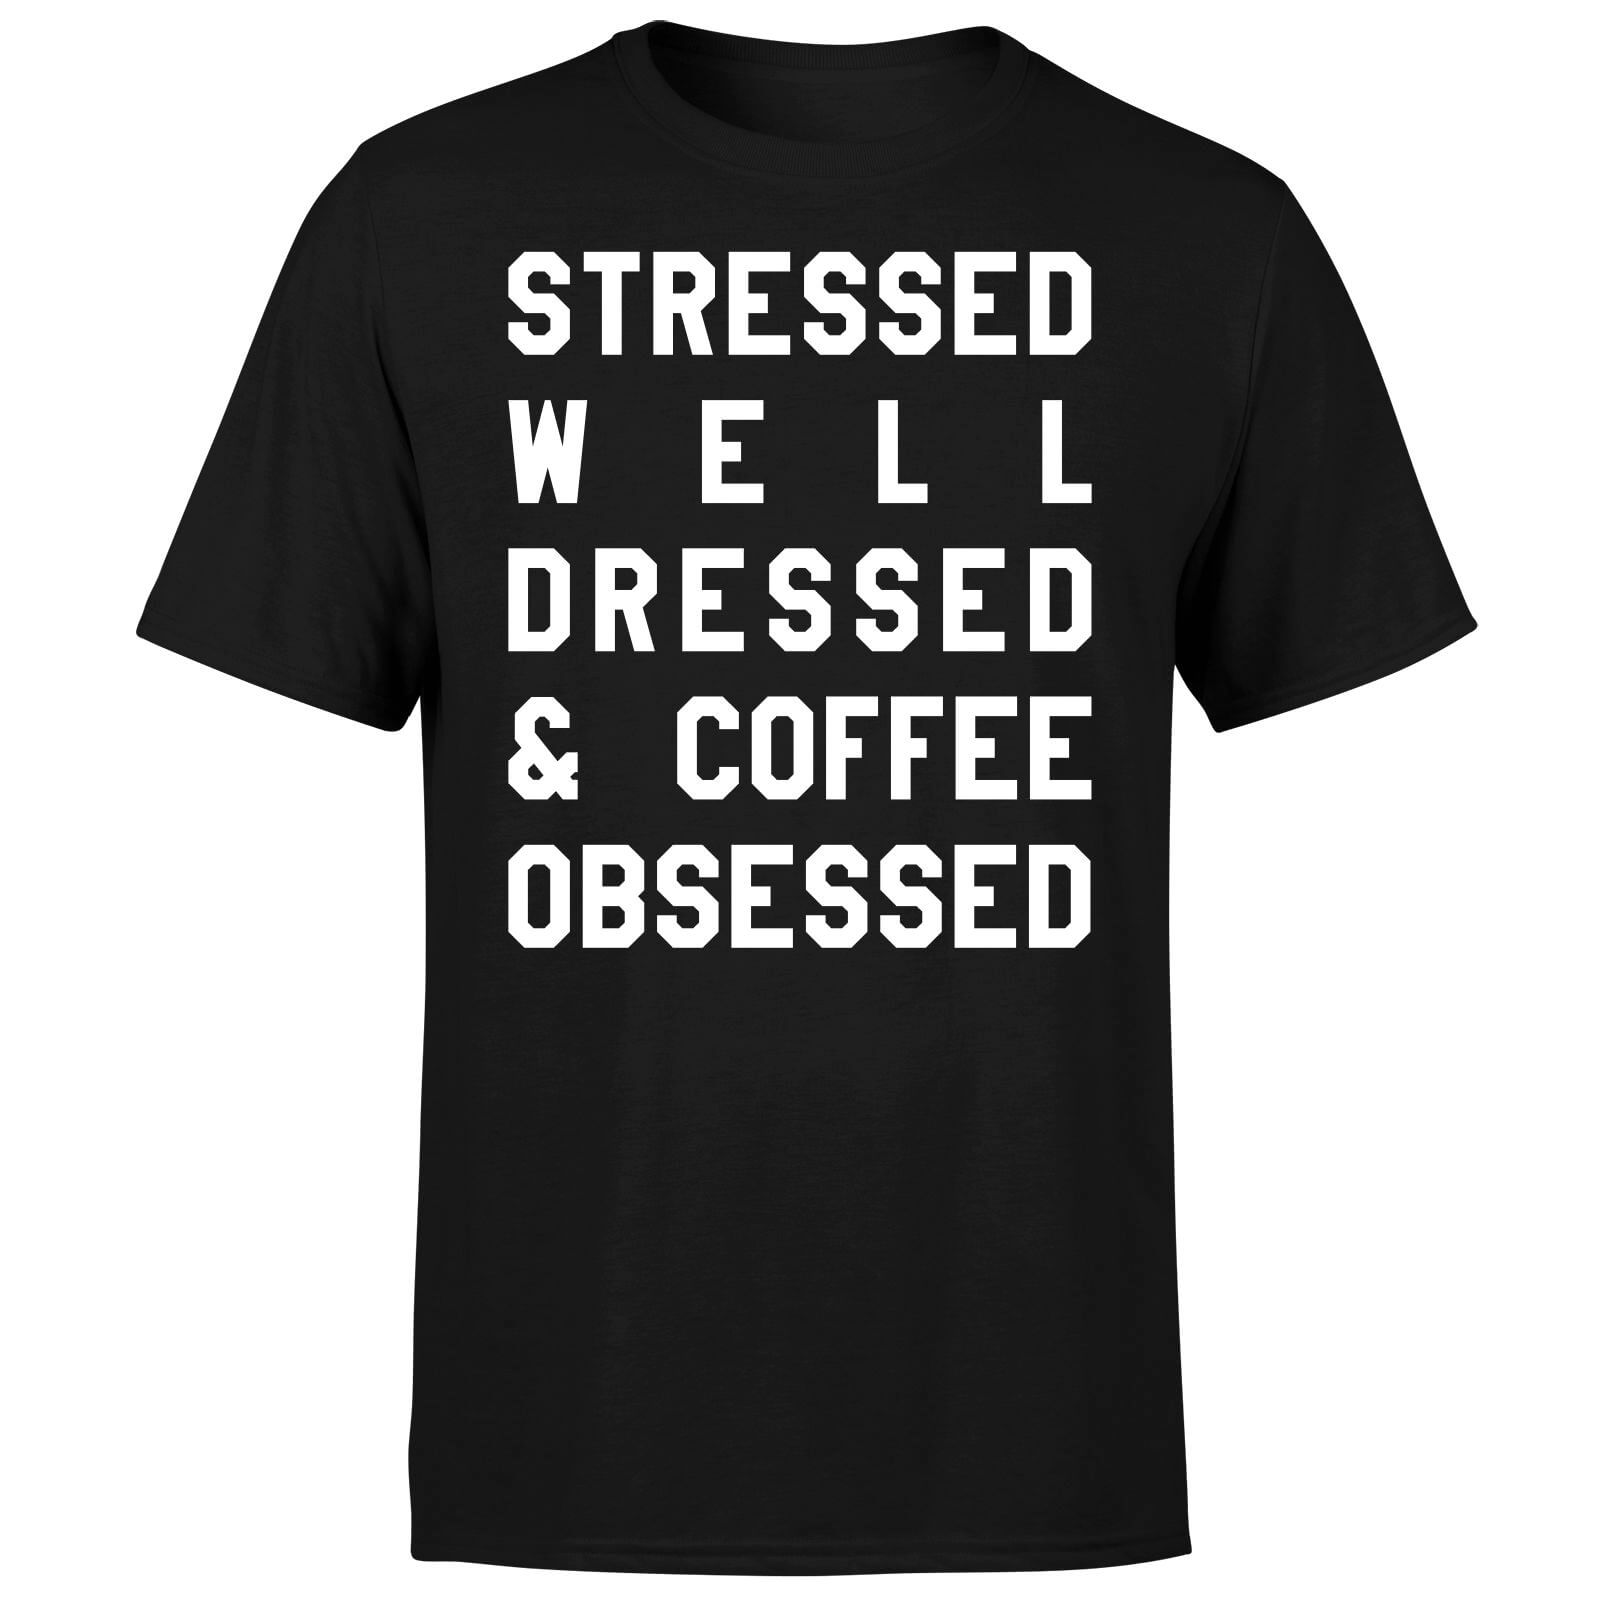 Stressed Dressed and Coffee Obsessed T-Shirt - Black - S - Black